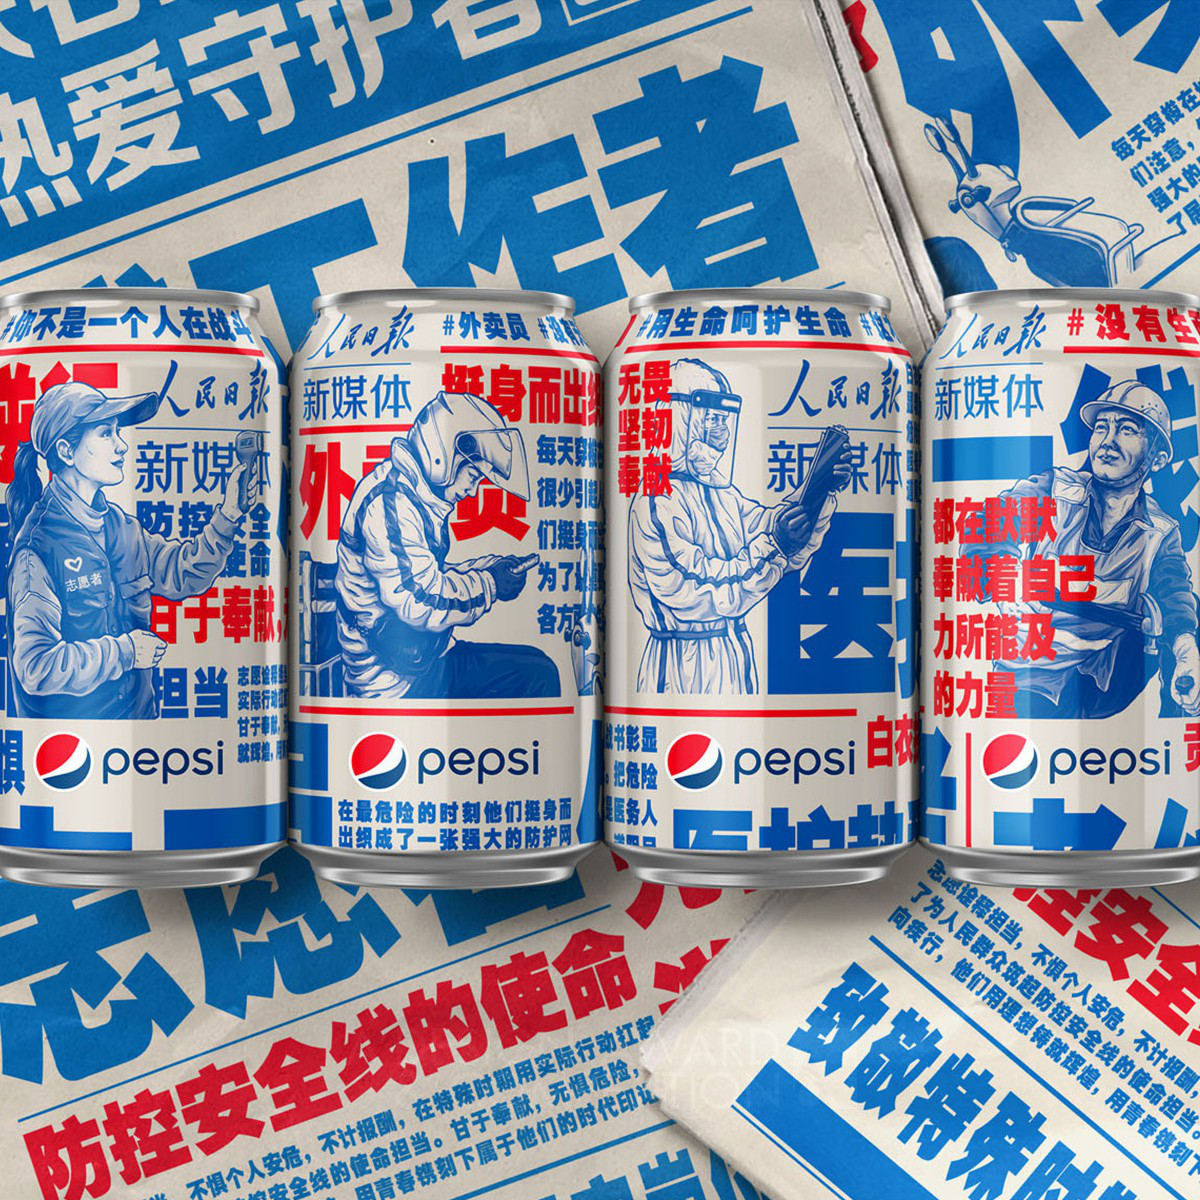 Pepsi Chinas People Daily New Media  Beverage by PepsiCo Design & Innovation